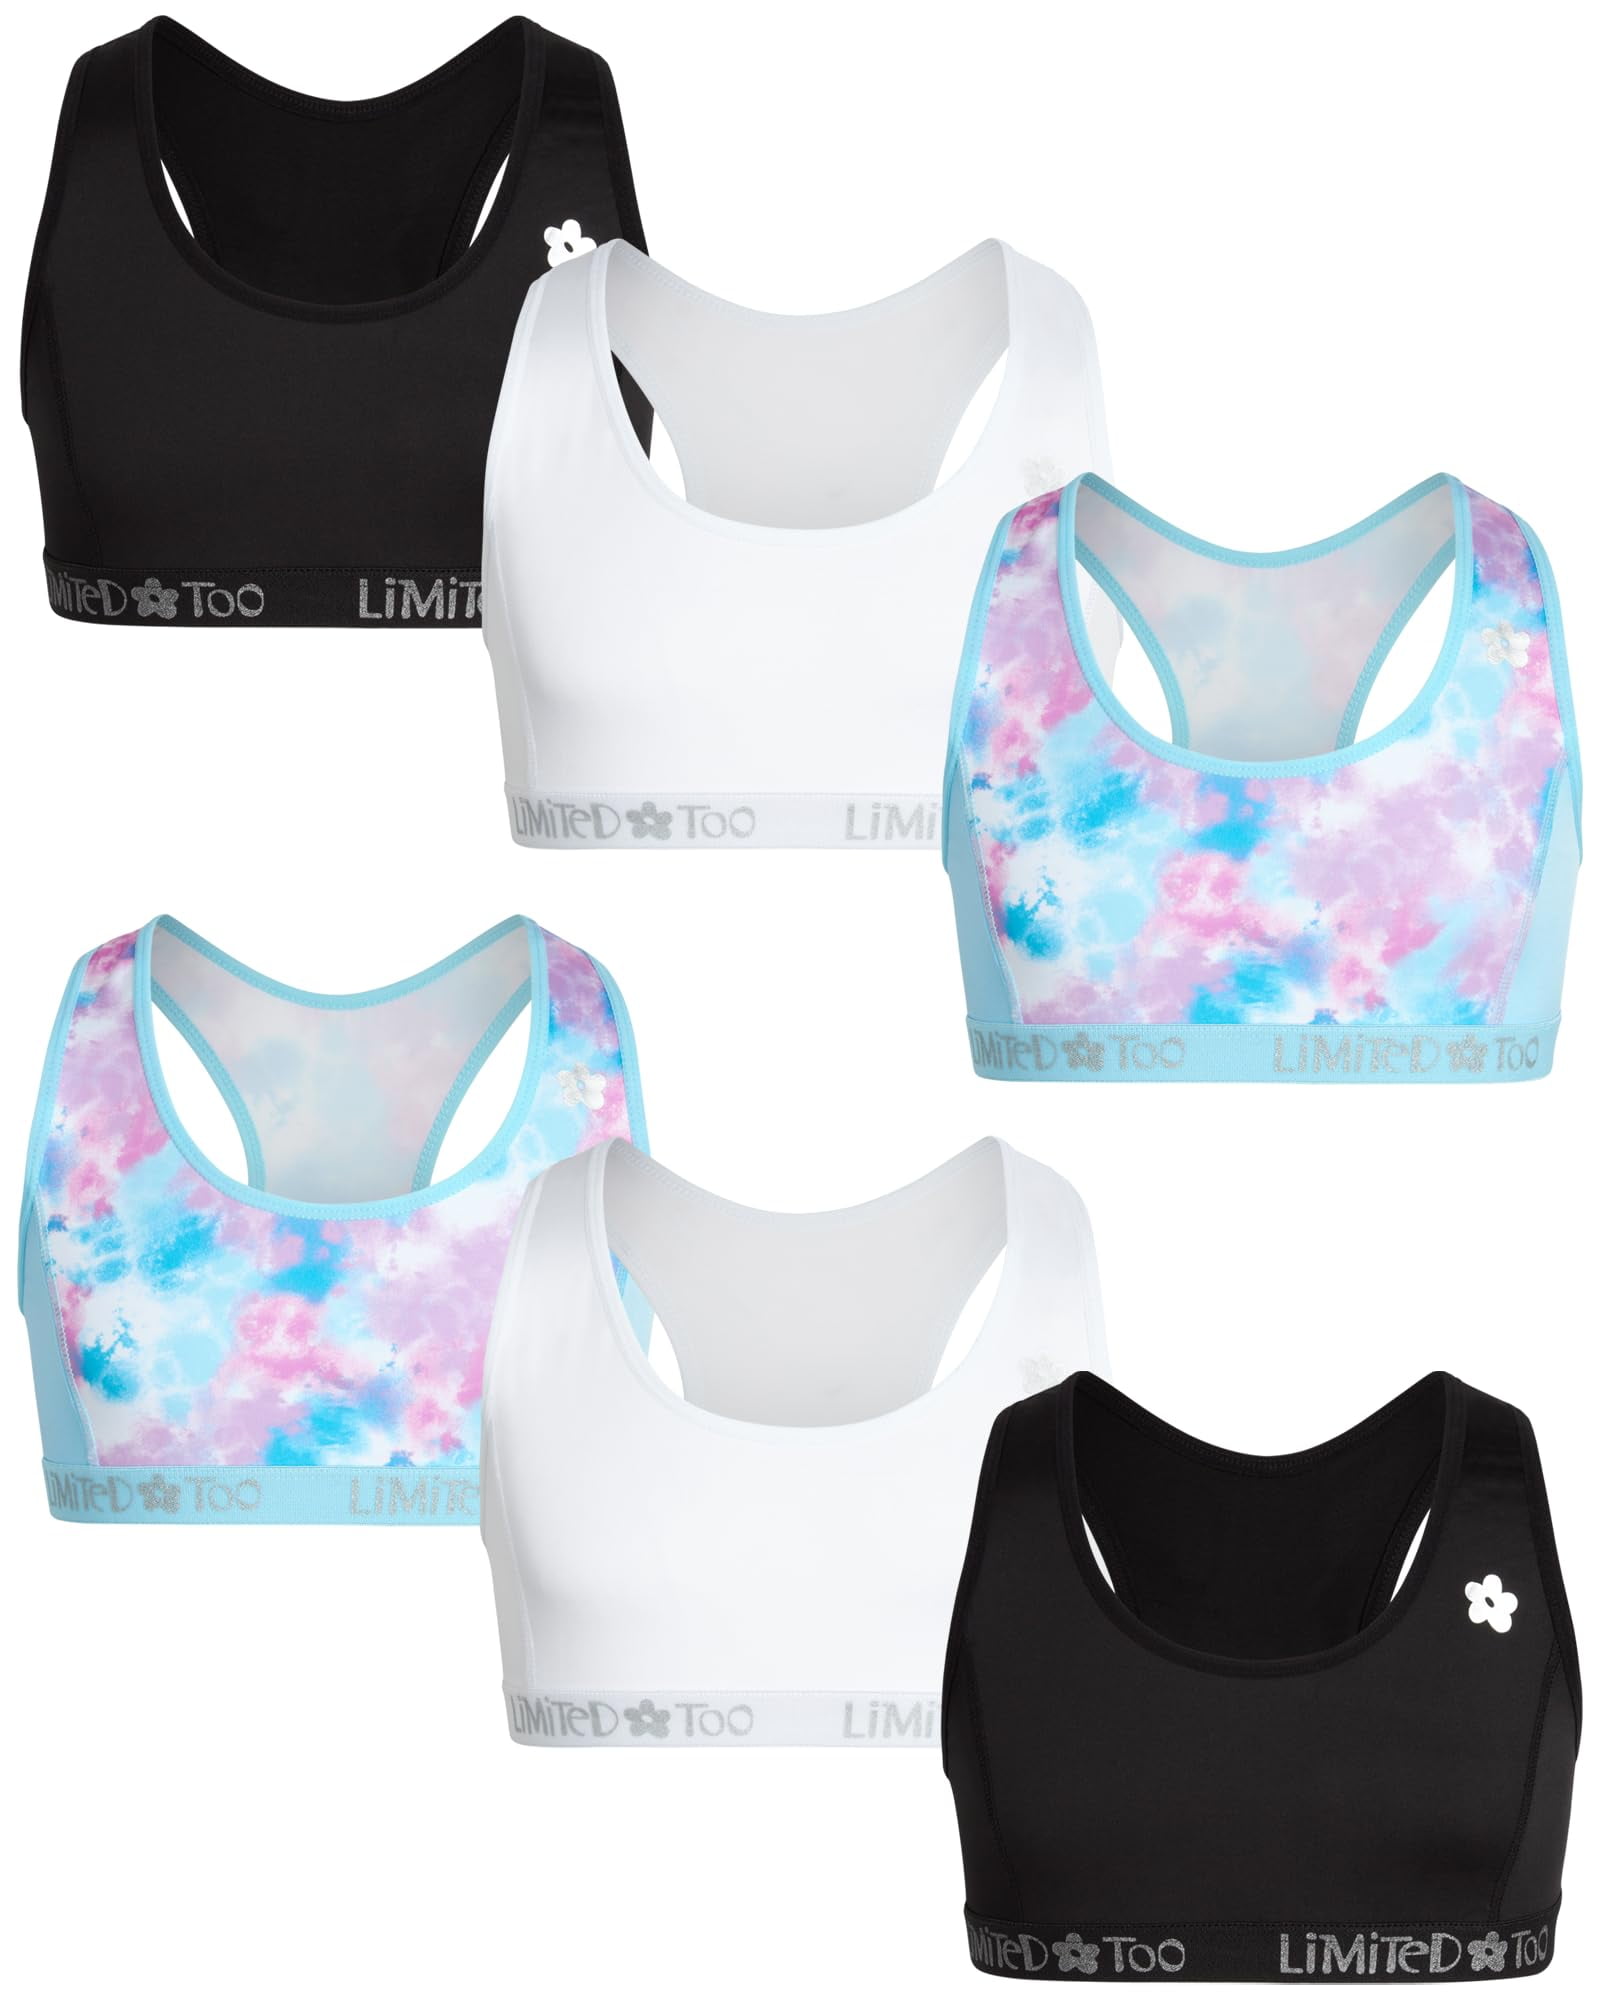  Soffe Girls' Sports Bra White SML : Clothing, Shoes & Jewelry